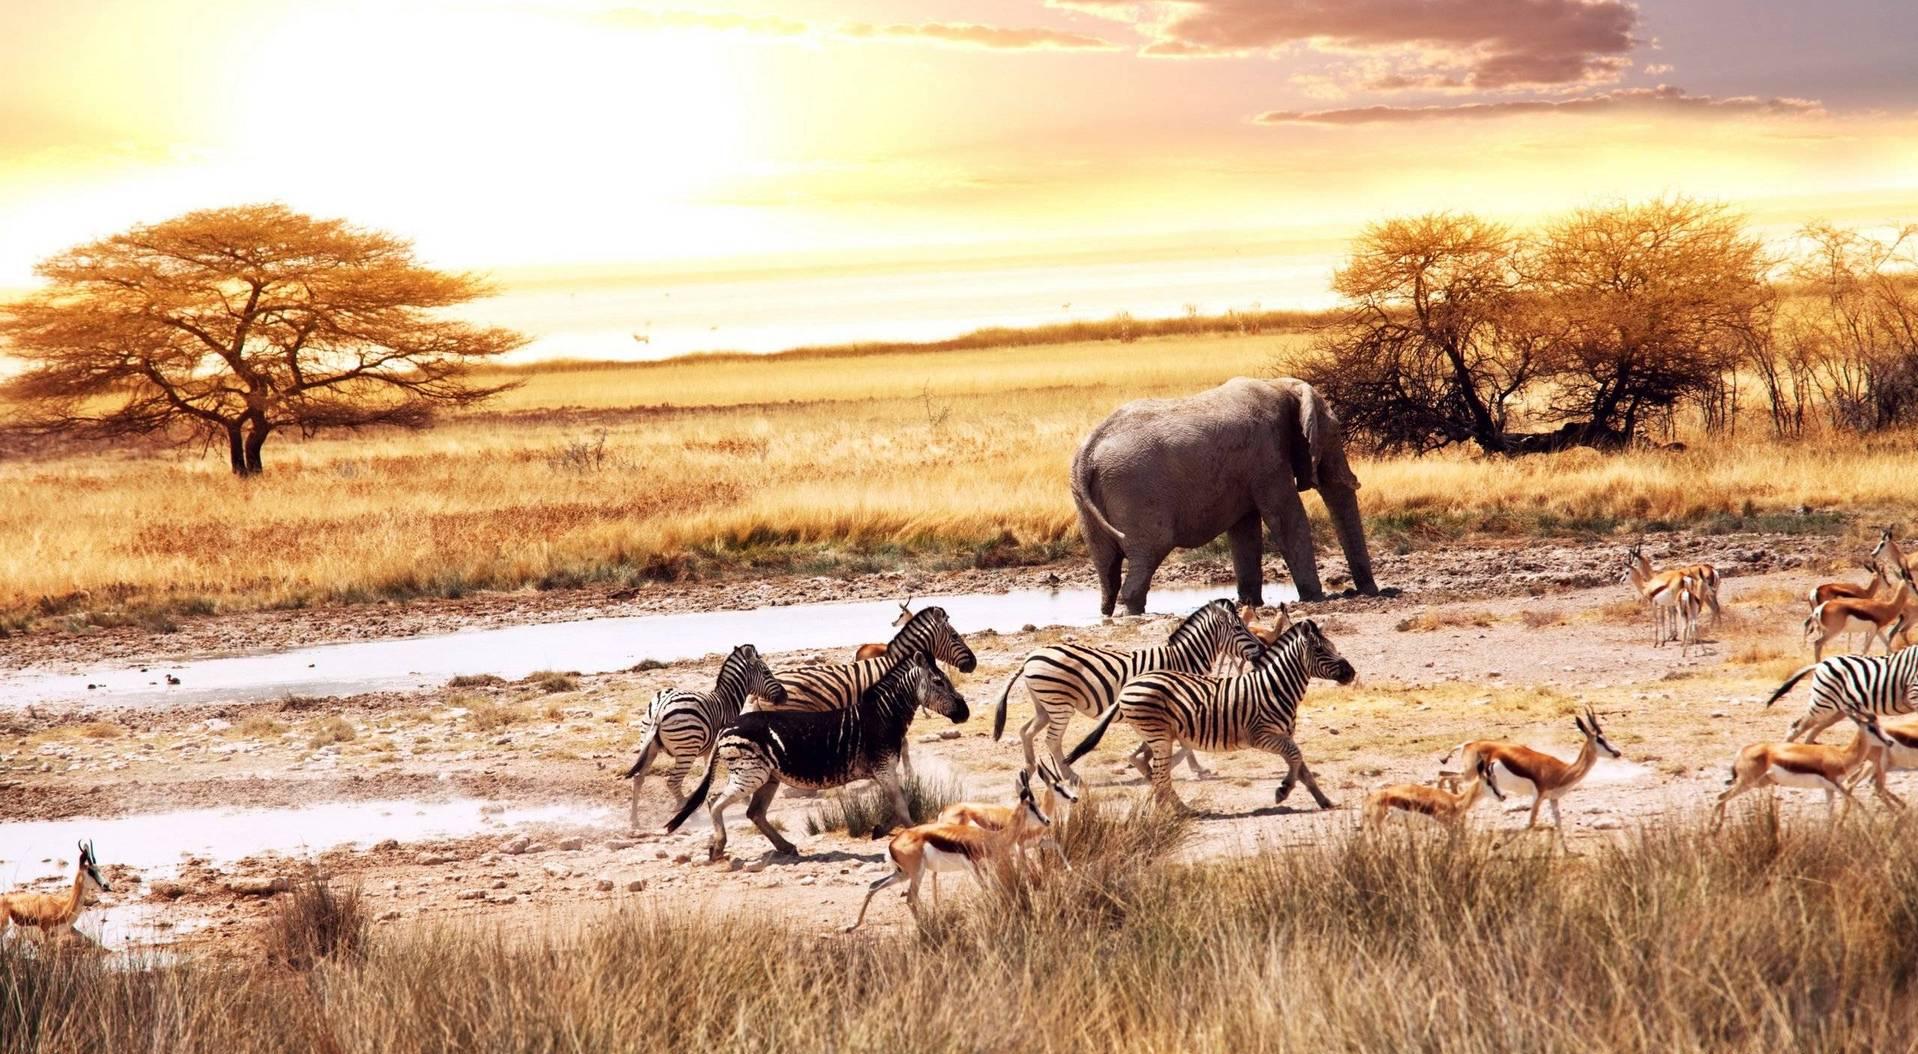 African Landscape Of African Savanna | Download HD Wallpapers Photos